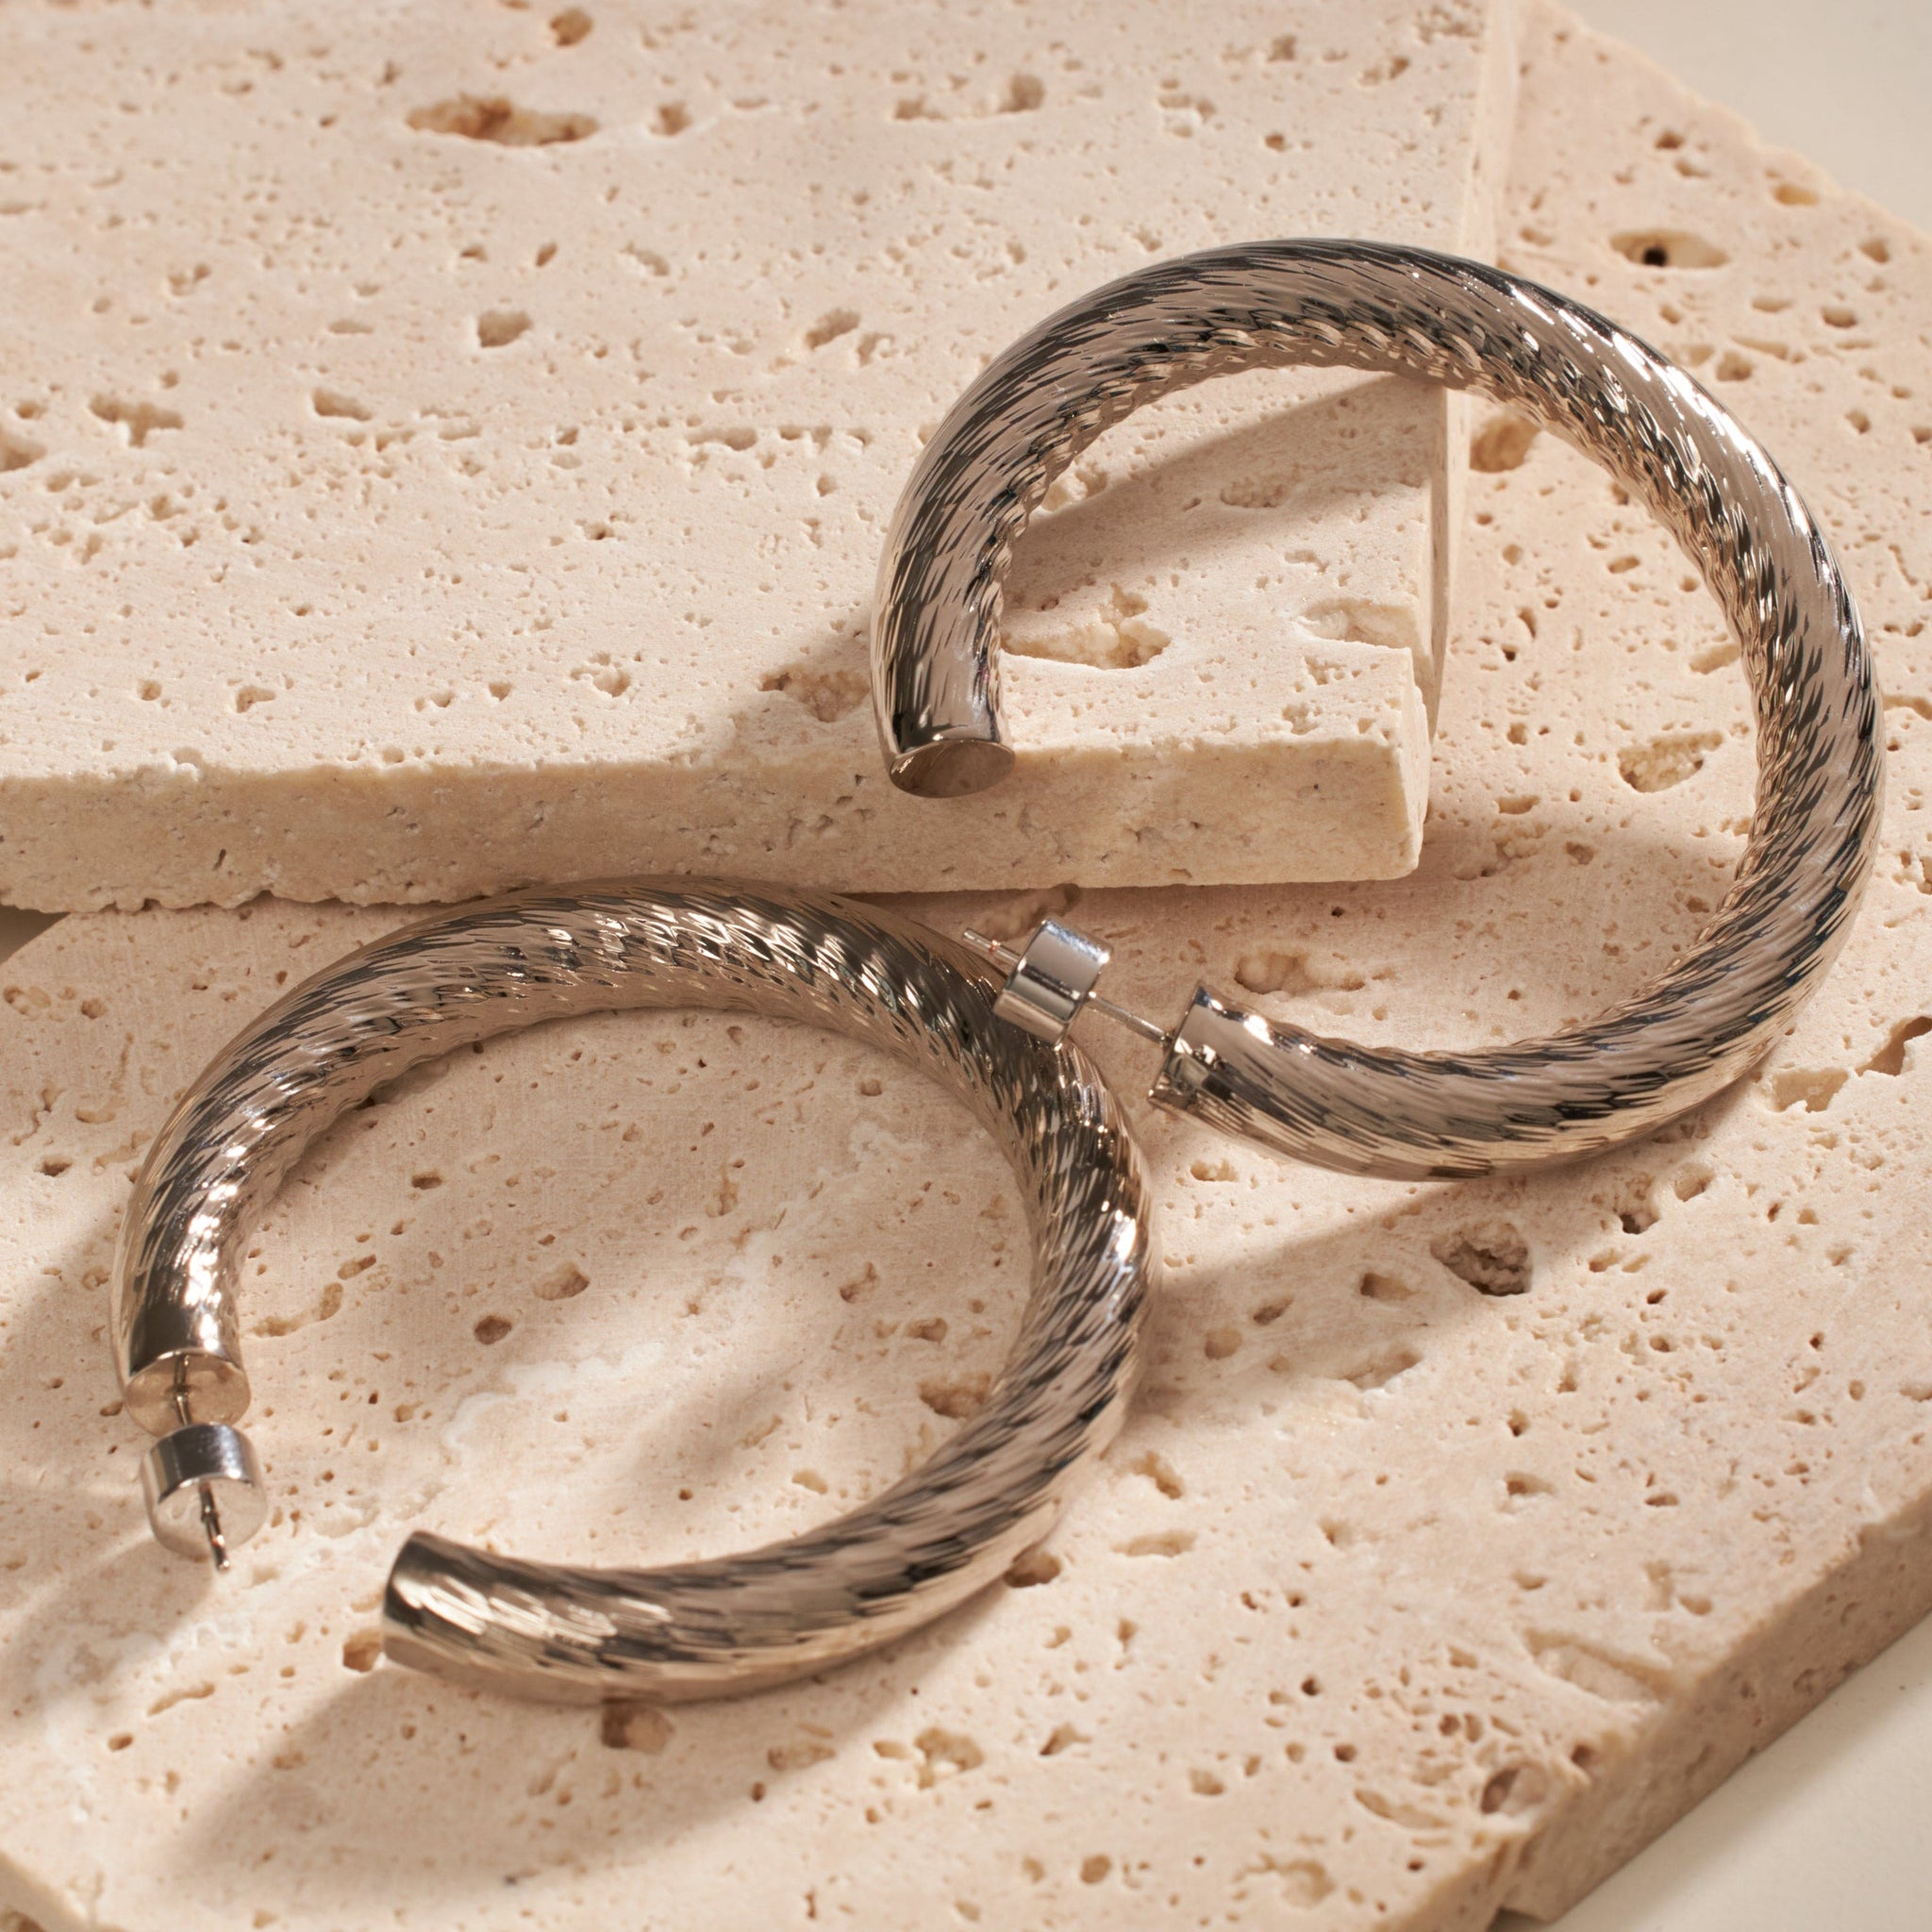  A pair of Madrid Hoop Platinum earrings lay side by side on two layered stone slabs, the close angle displaying the elegant rope-like texture, shining silver finish, and open hoop design. 